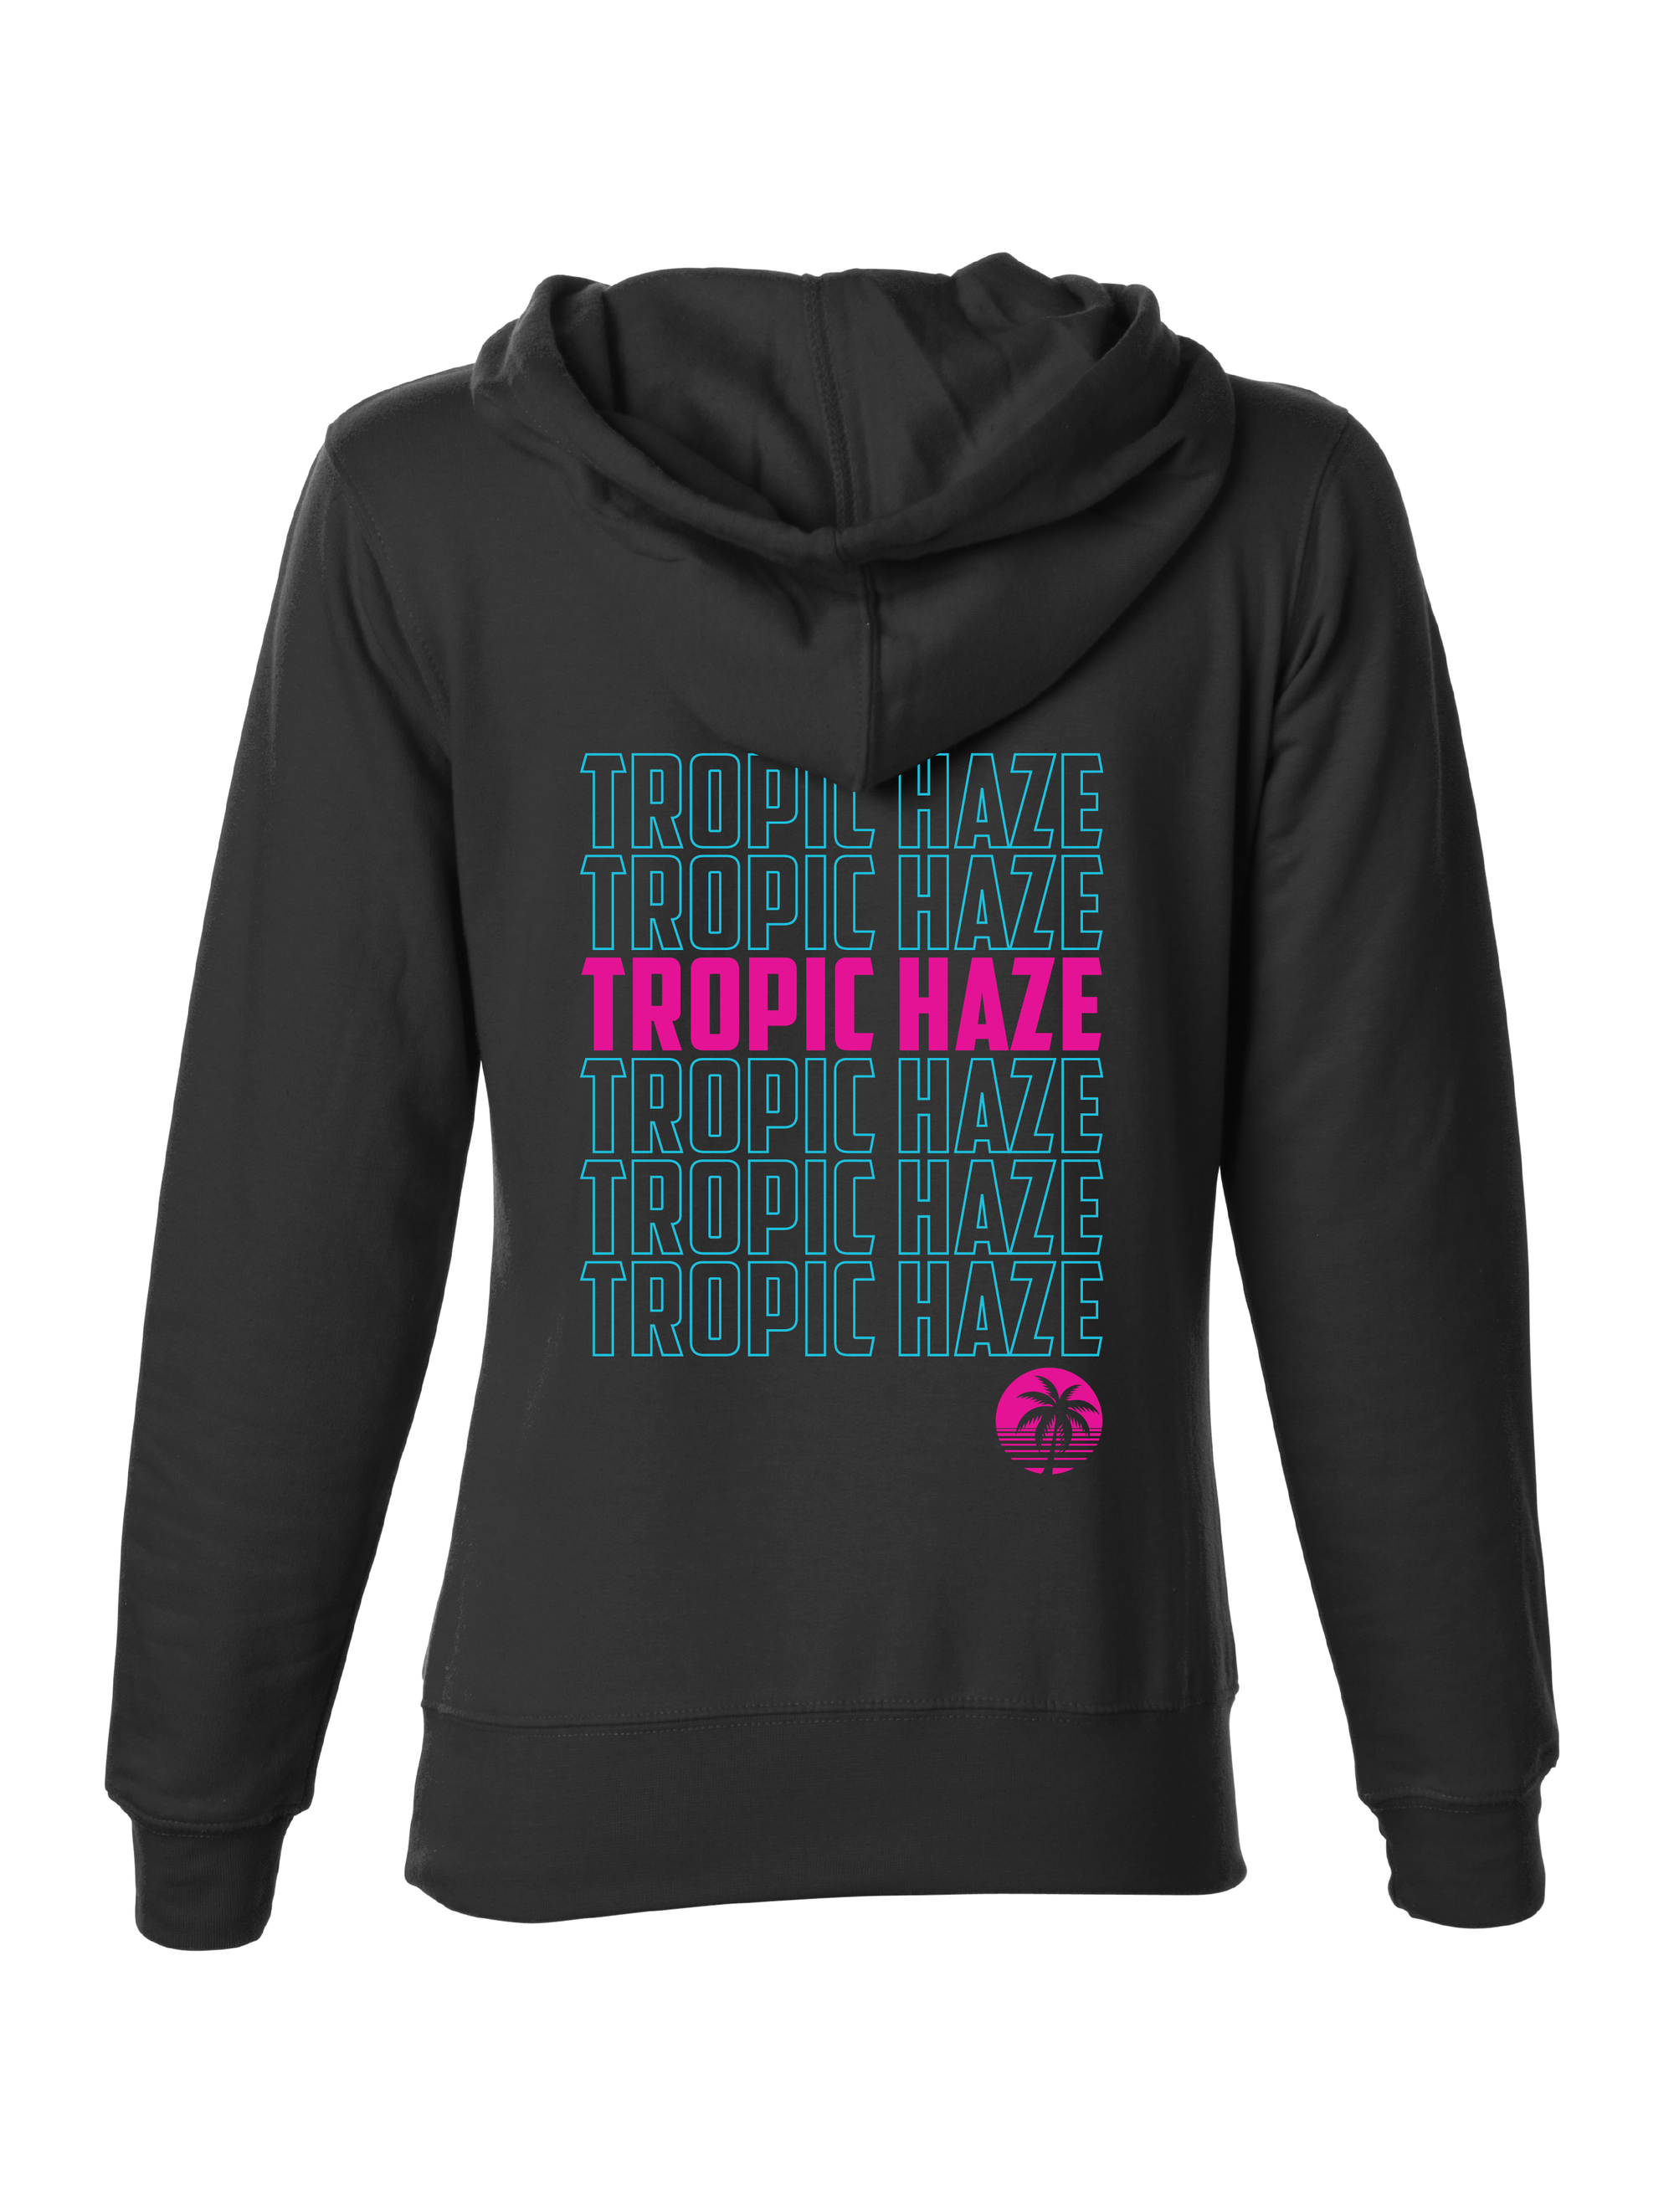 Silver City Tropic Haze · Pullover Hoodie